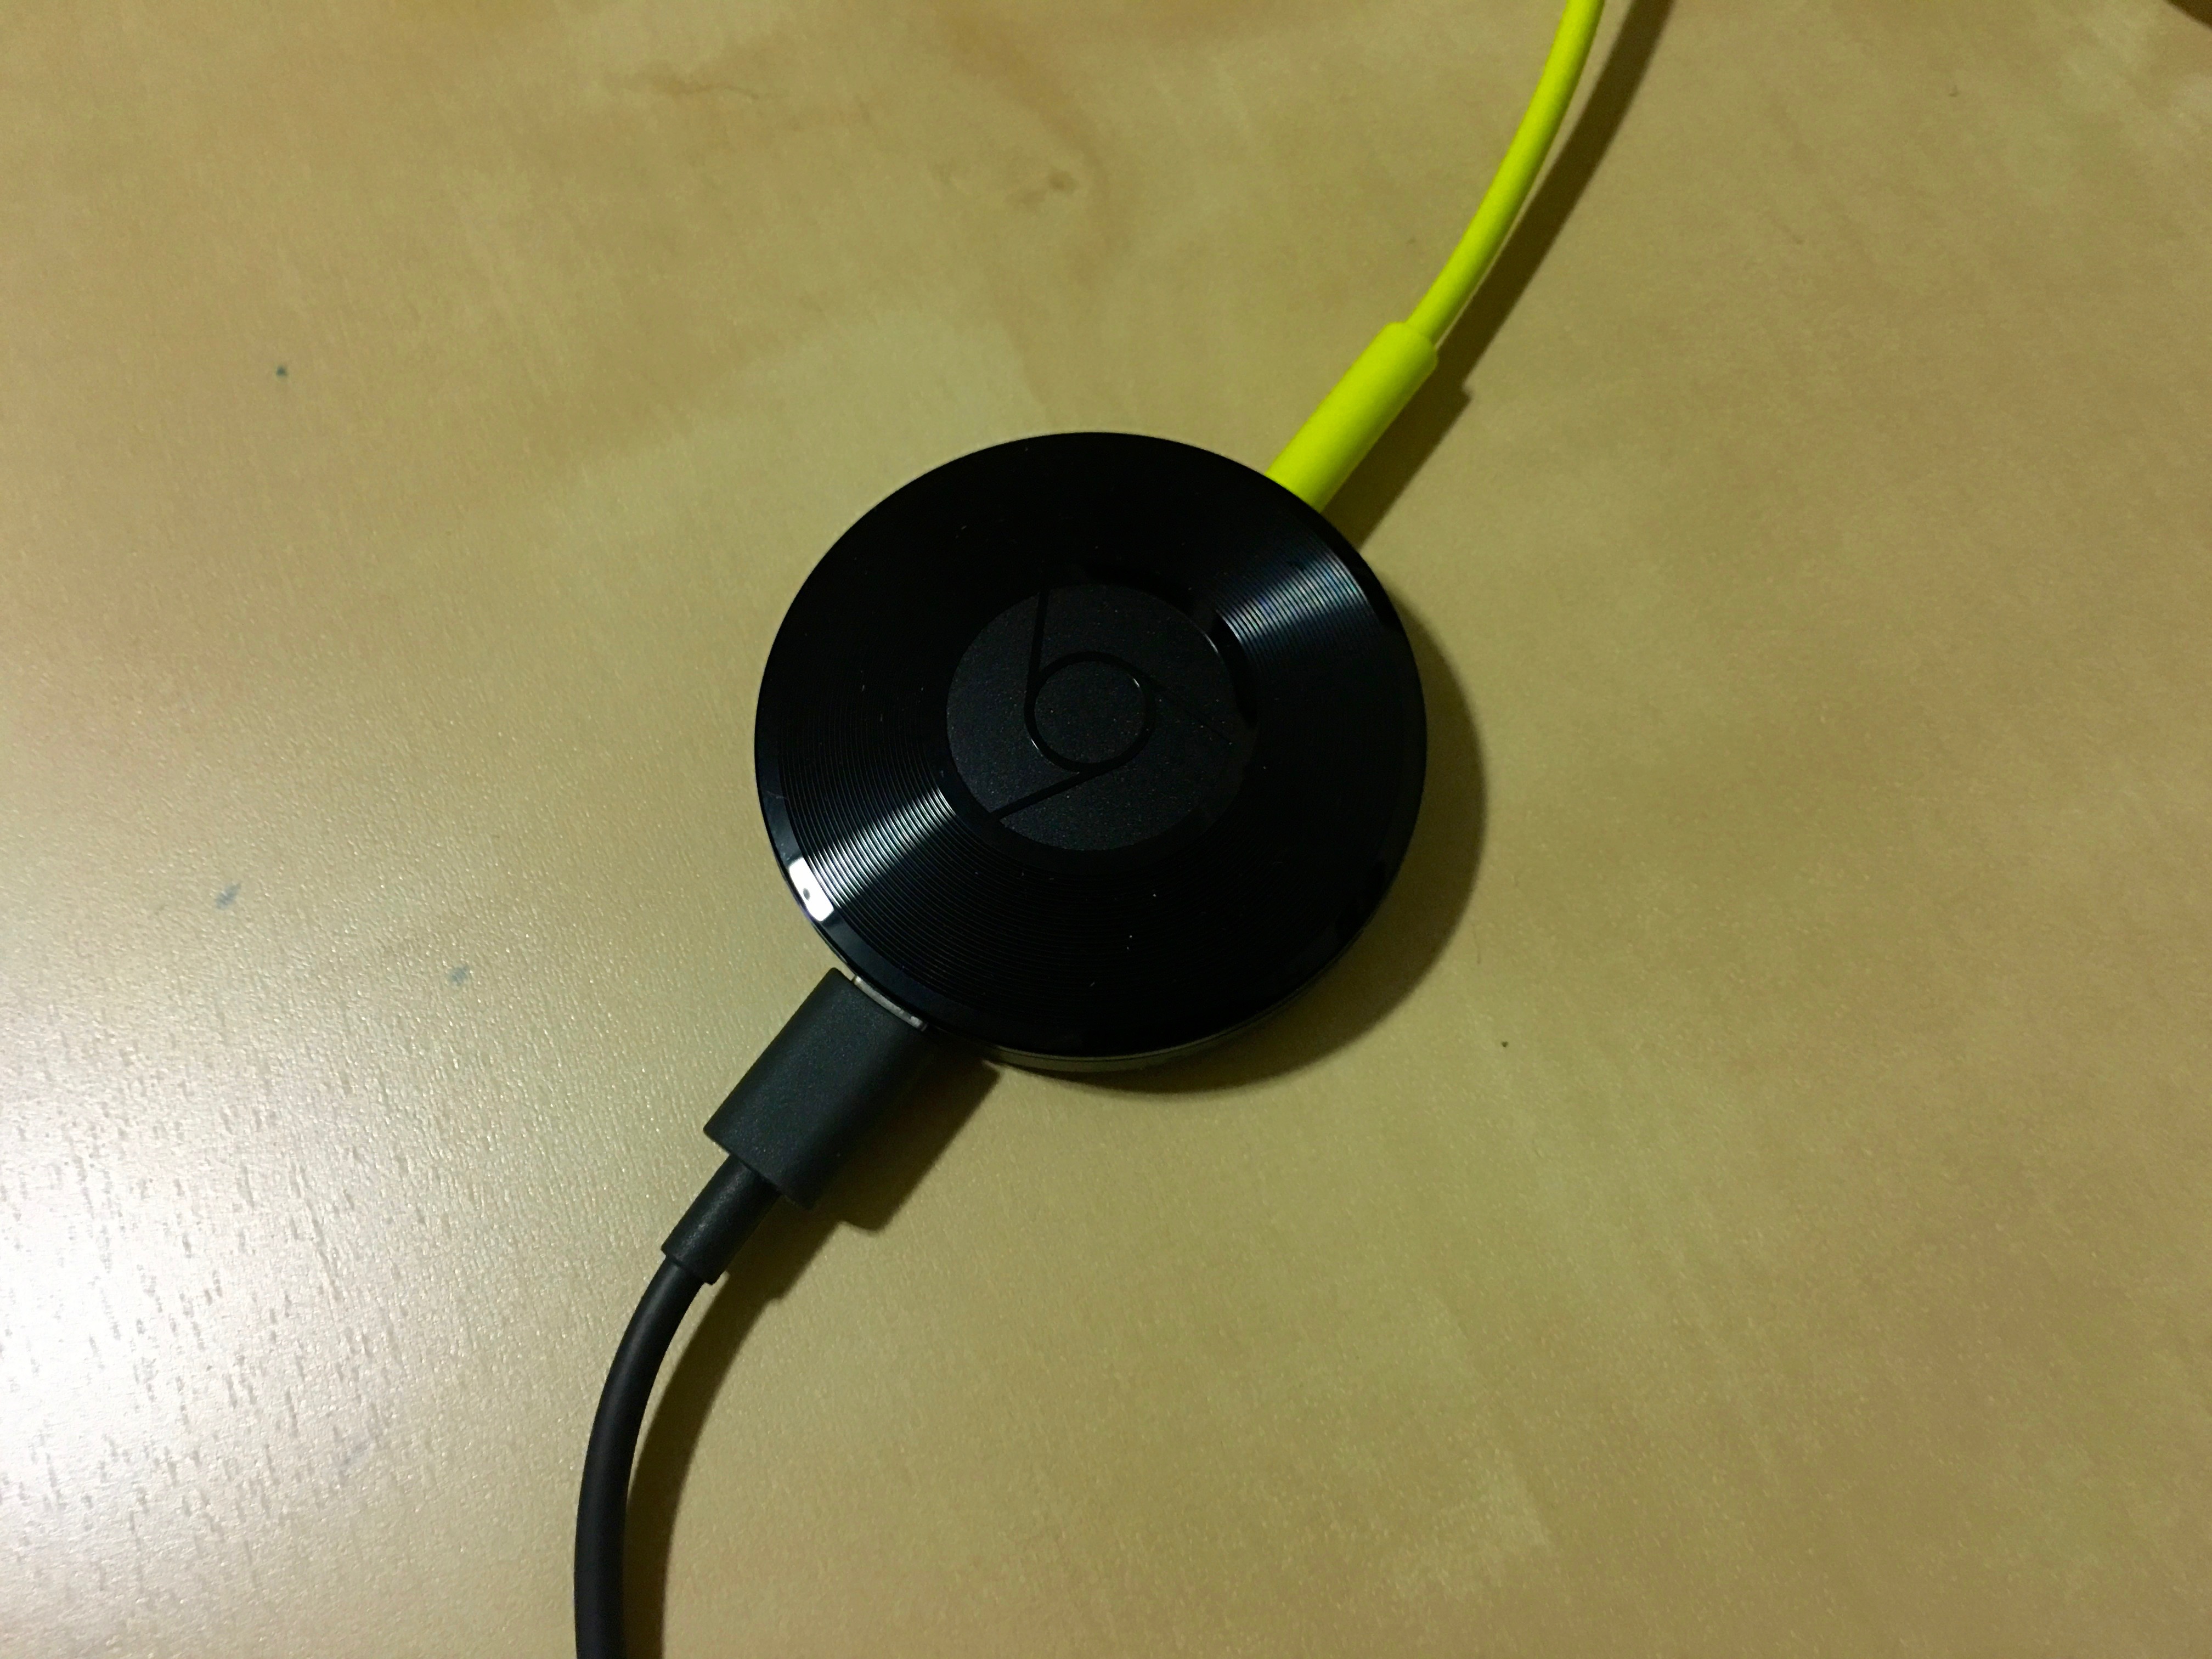 Rykke kold rolle Review: Chromecast Audio brings new life to dated speakers for just $35 -  9to5Mac